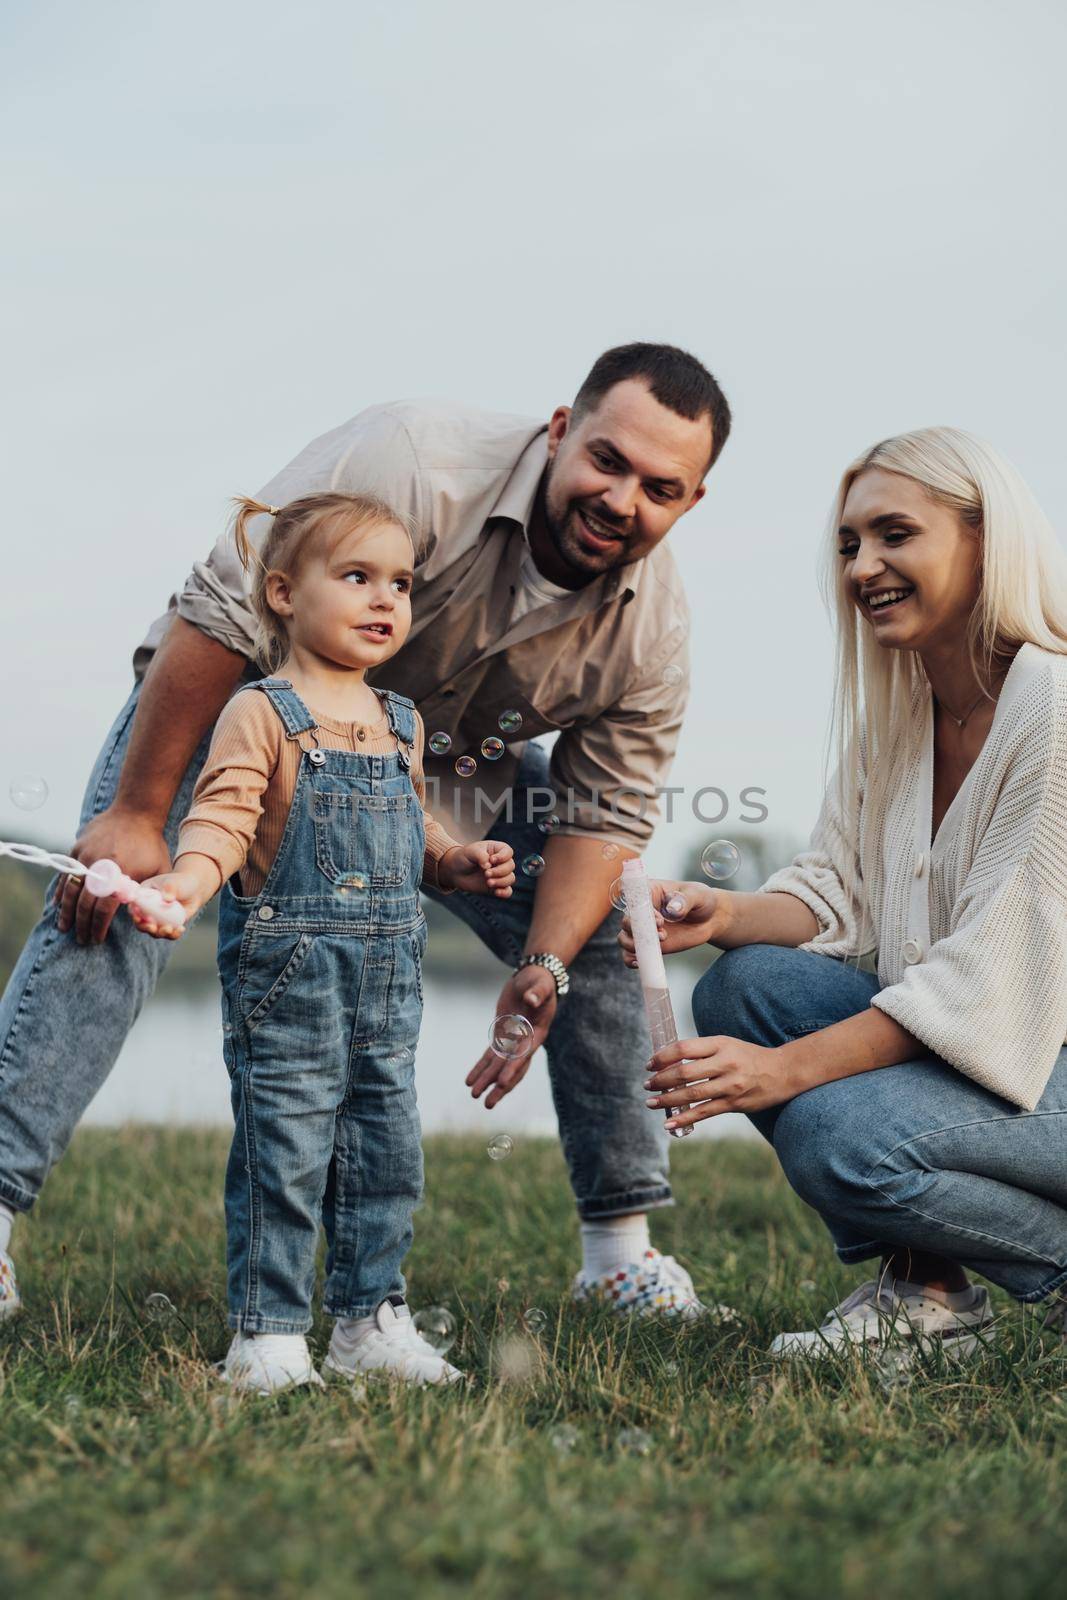 Portrait of Happy Young Family, Mom and Dad with Their Little Daughter Having Fun Outdoors Outside the City by Romvy